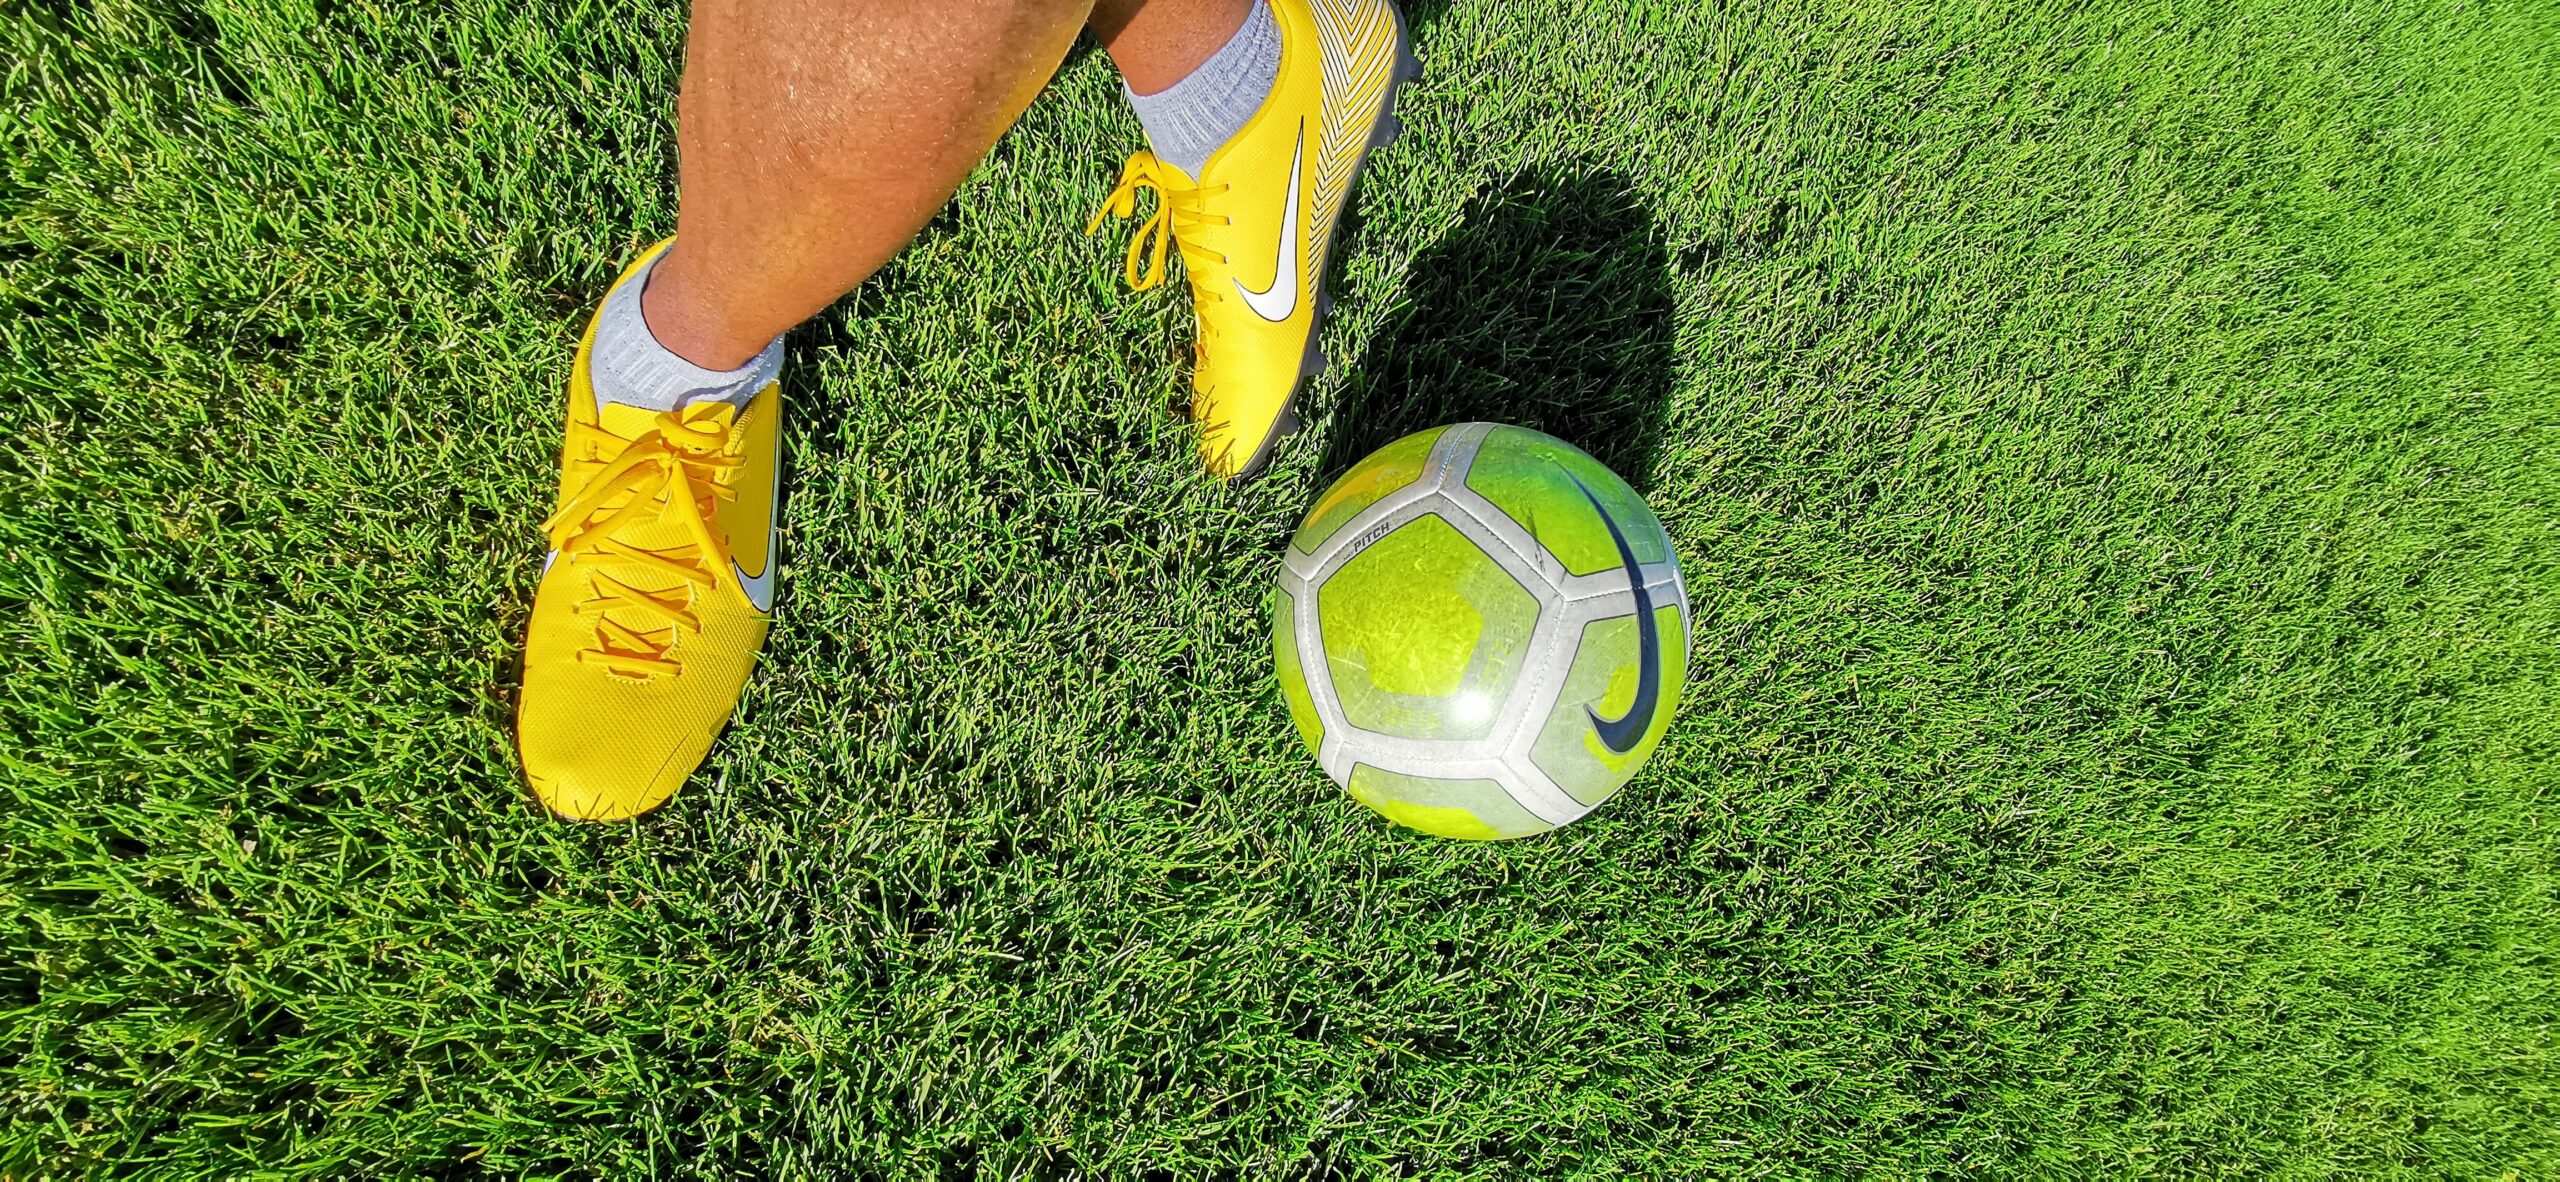 Unleash Your Soccer Skills with Orange Soccer Cleats